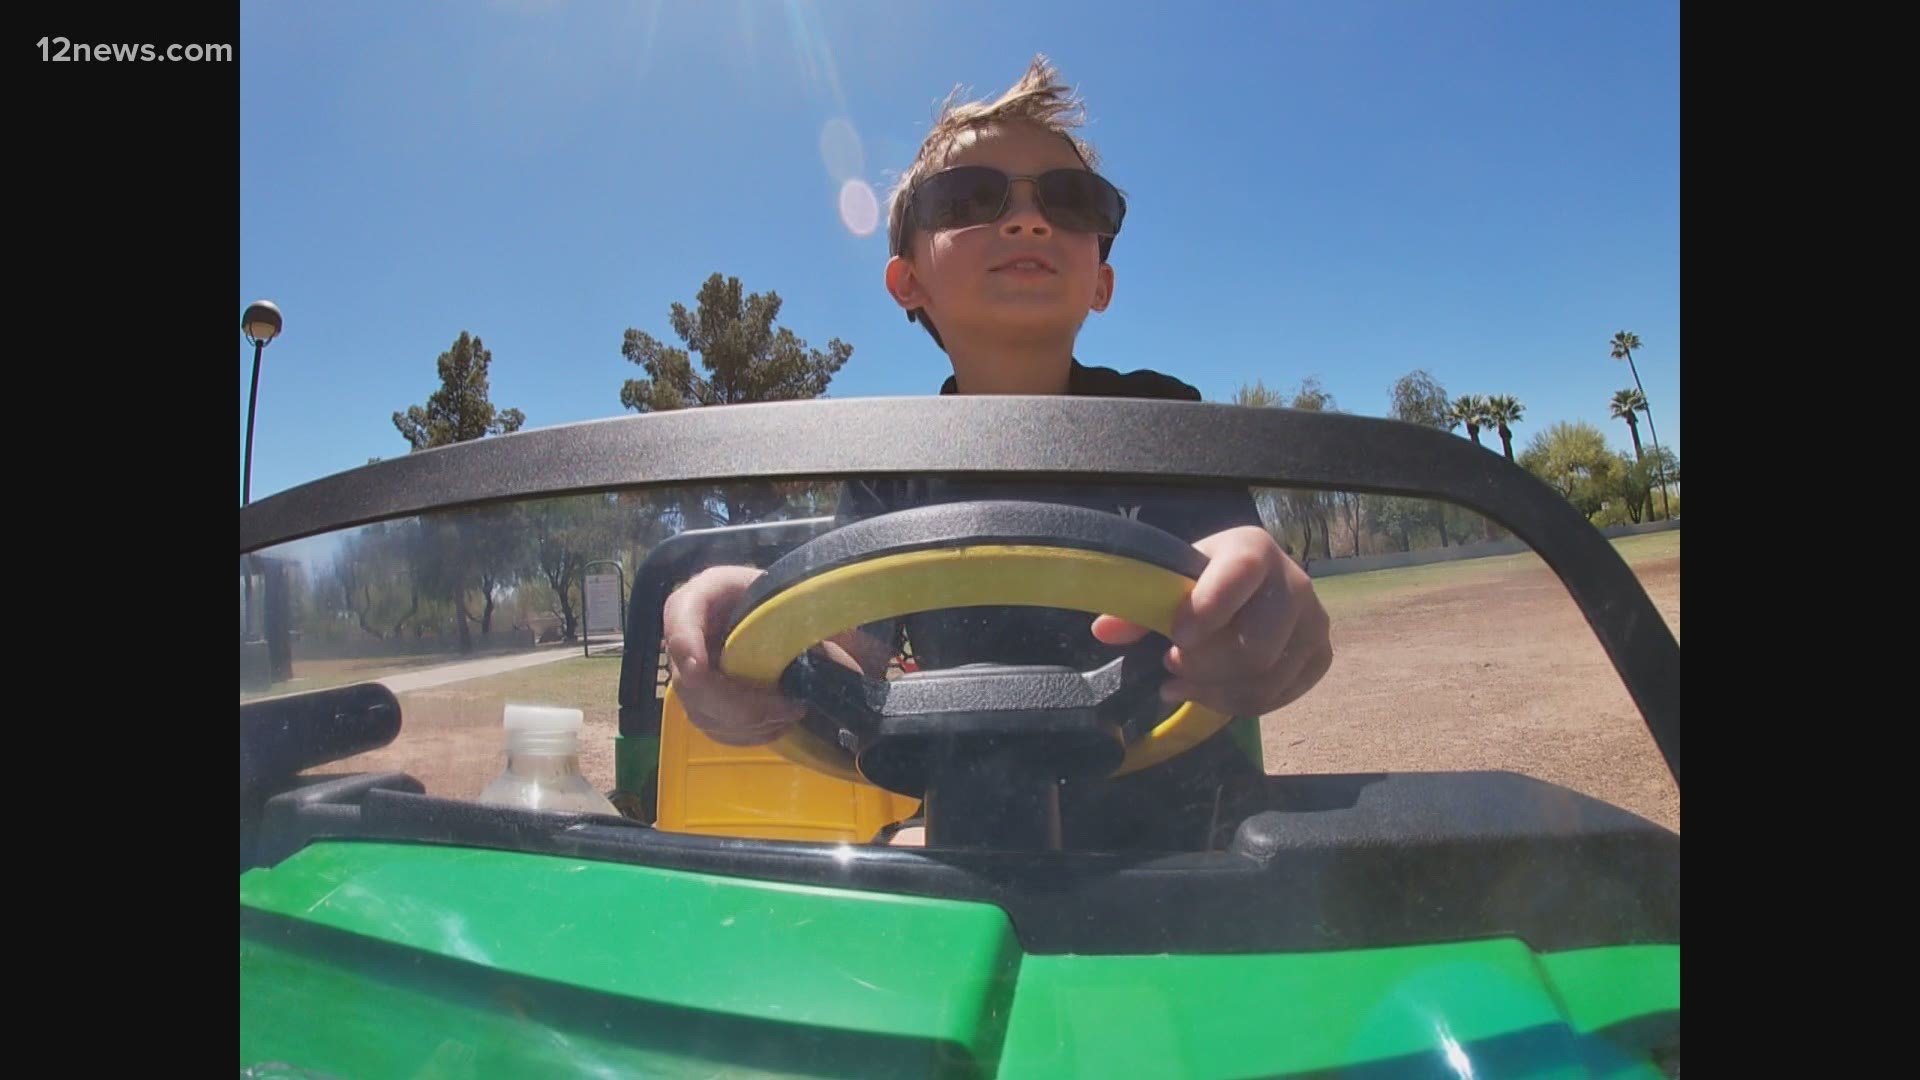 A 4-year-old boy who had his tractor toy stolen got a huge surprise from Tempe police. Officers gifted the boy a replacement toy that had a lot of sentimental value.